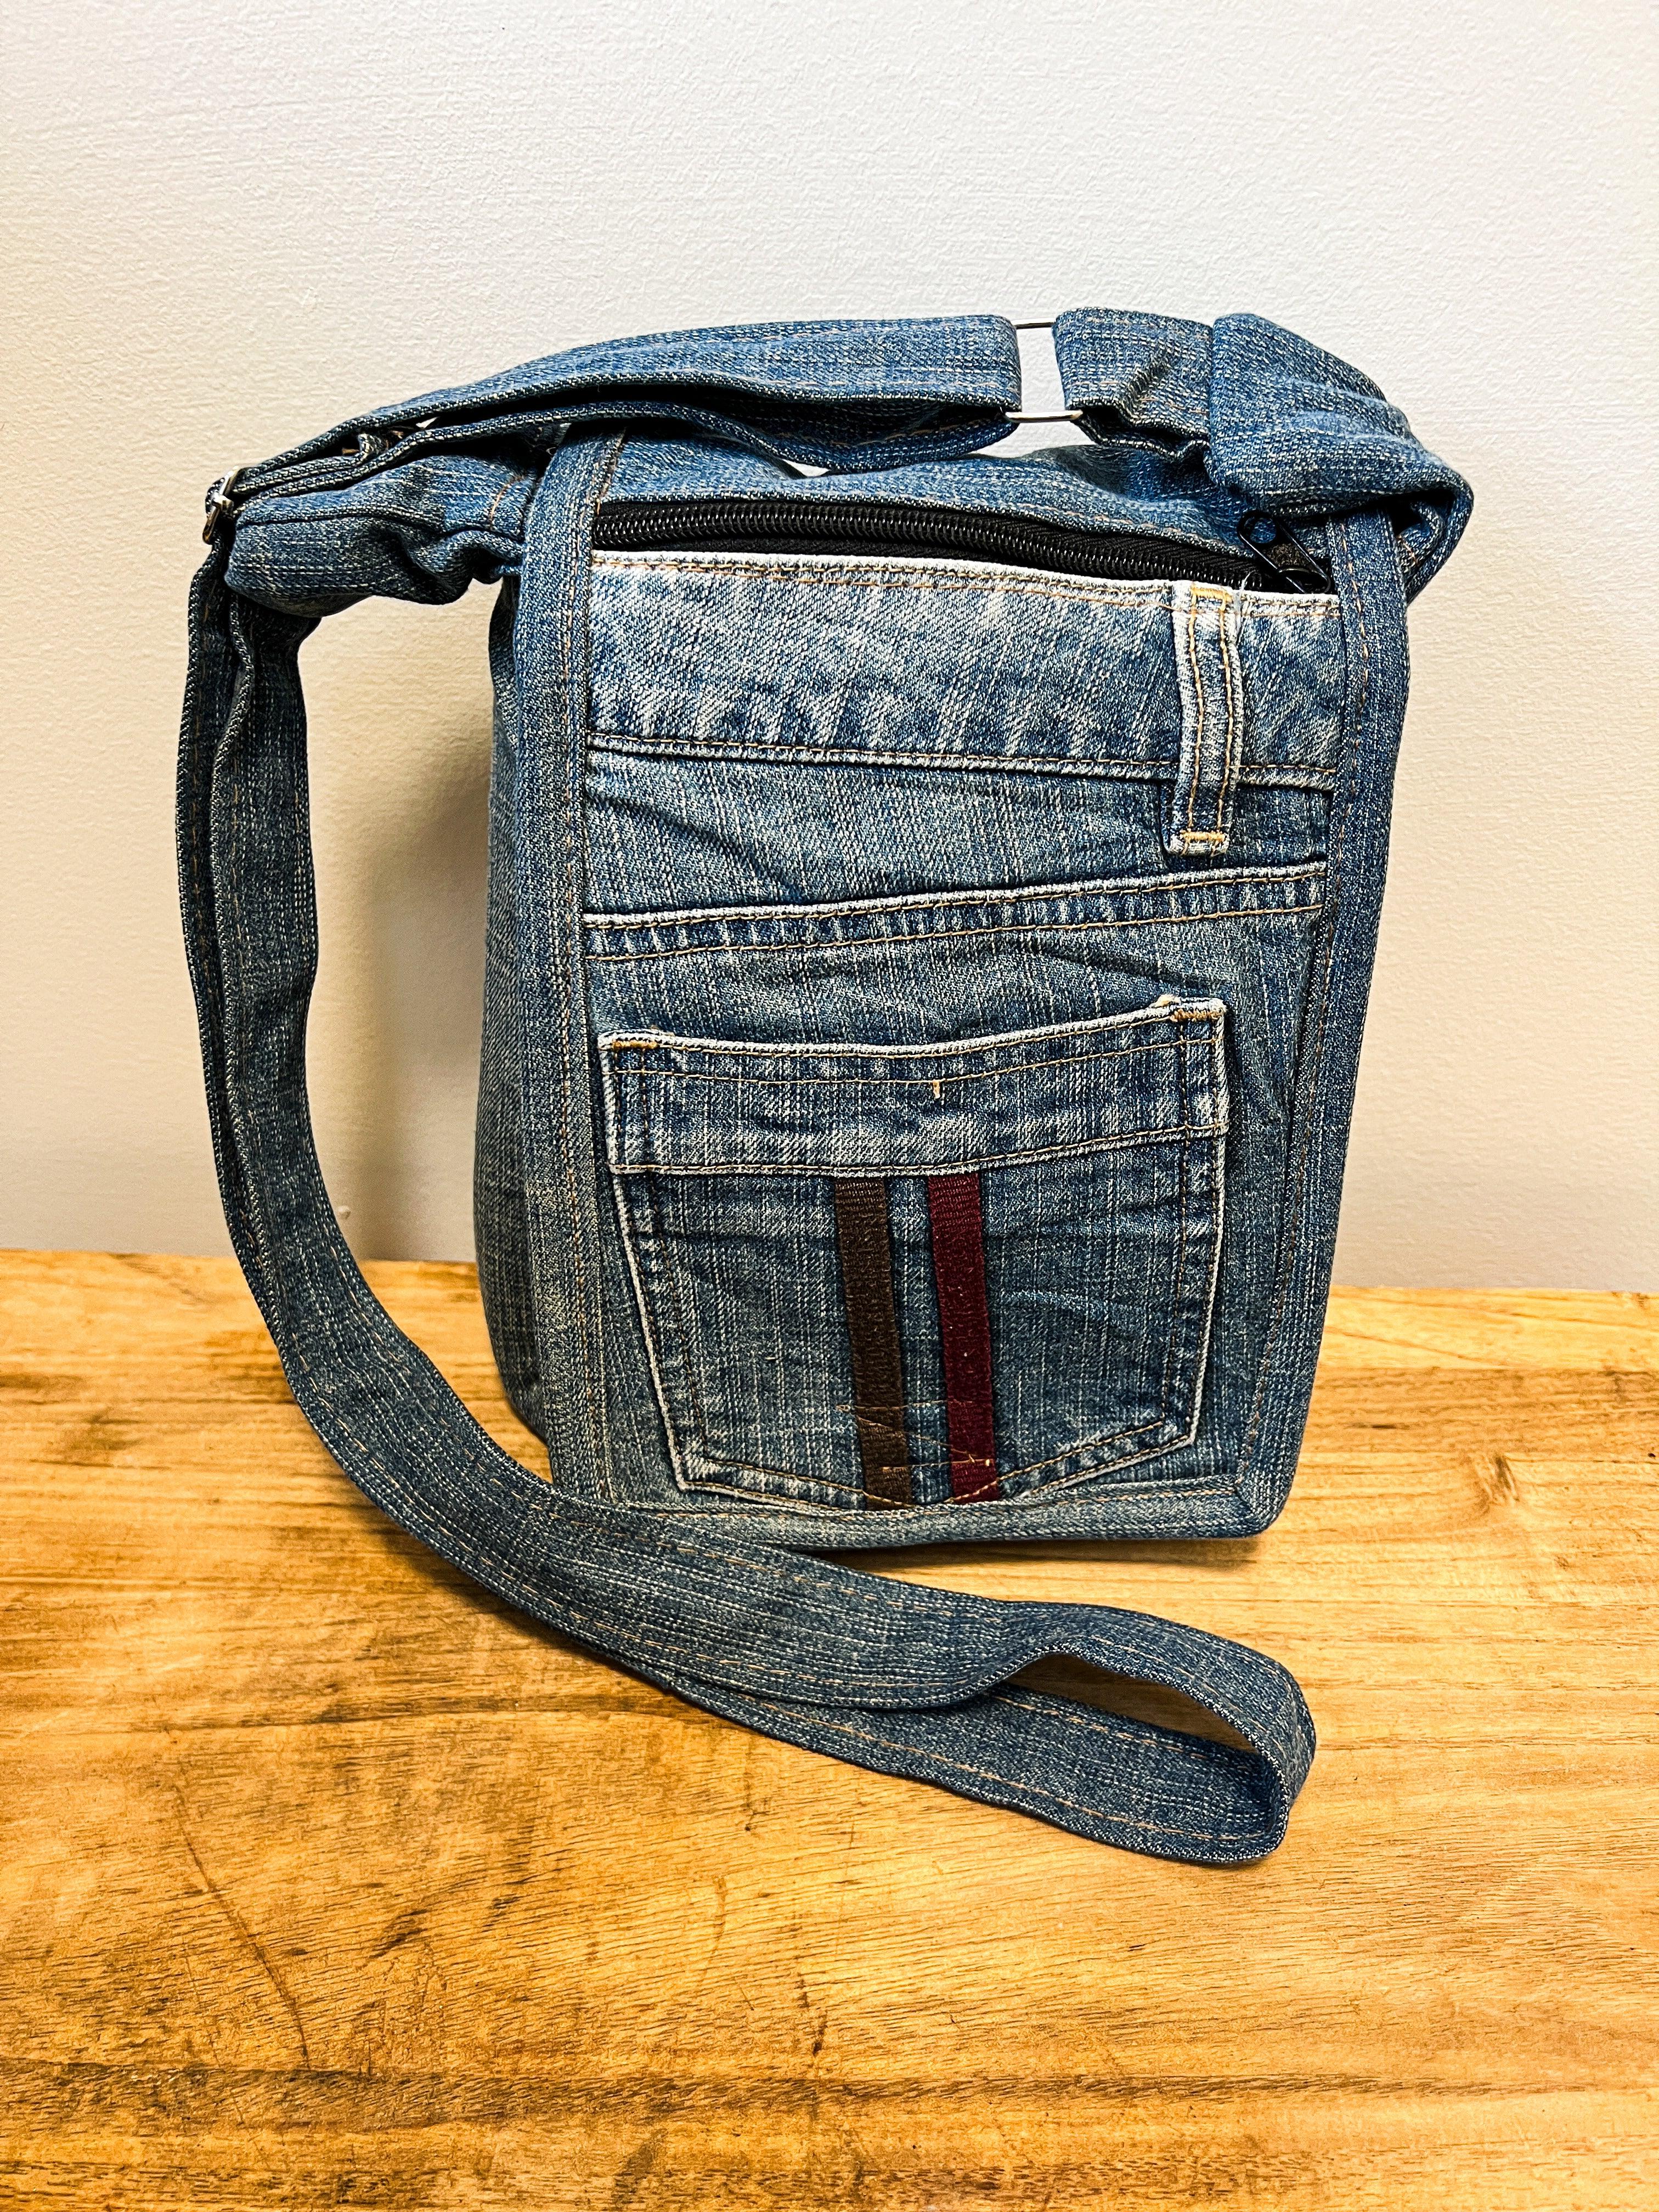 Old Jeans Upcycling Idea. Crafting With Denim, Recycling Old Clothers,  Hobby, Diy Activity Stock Photo, Picture and Royalty Free Image. Image  167053834.